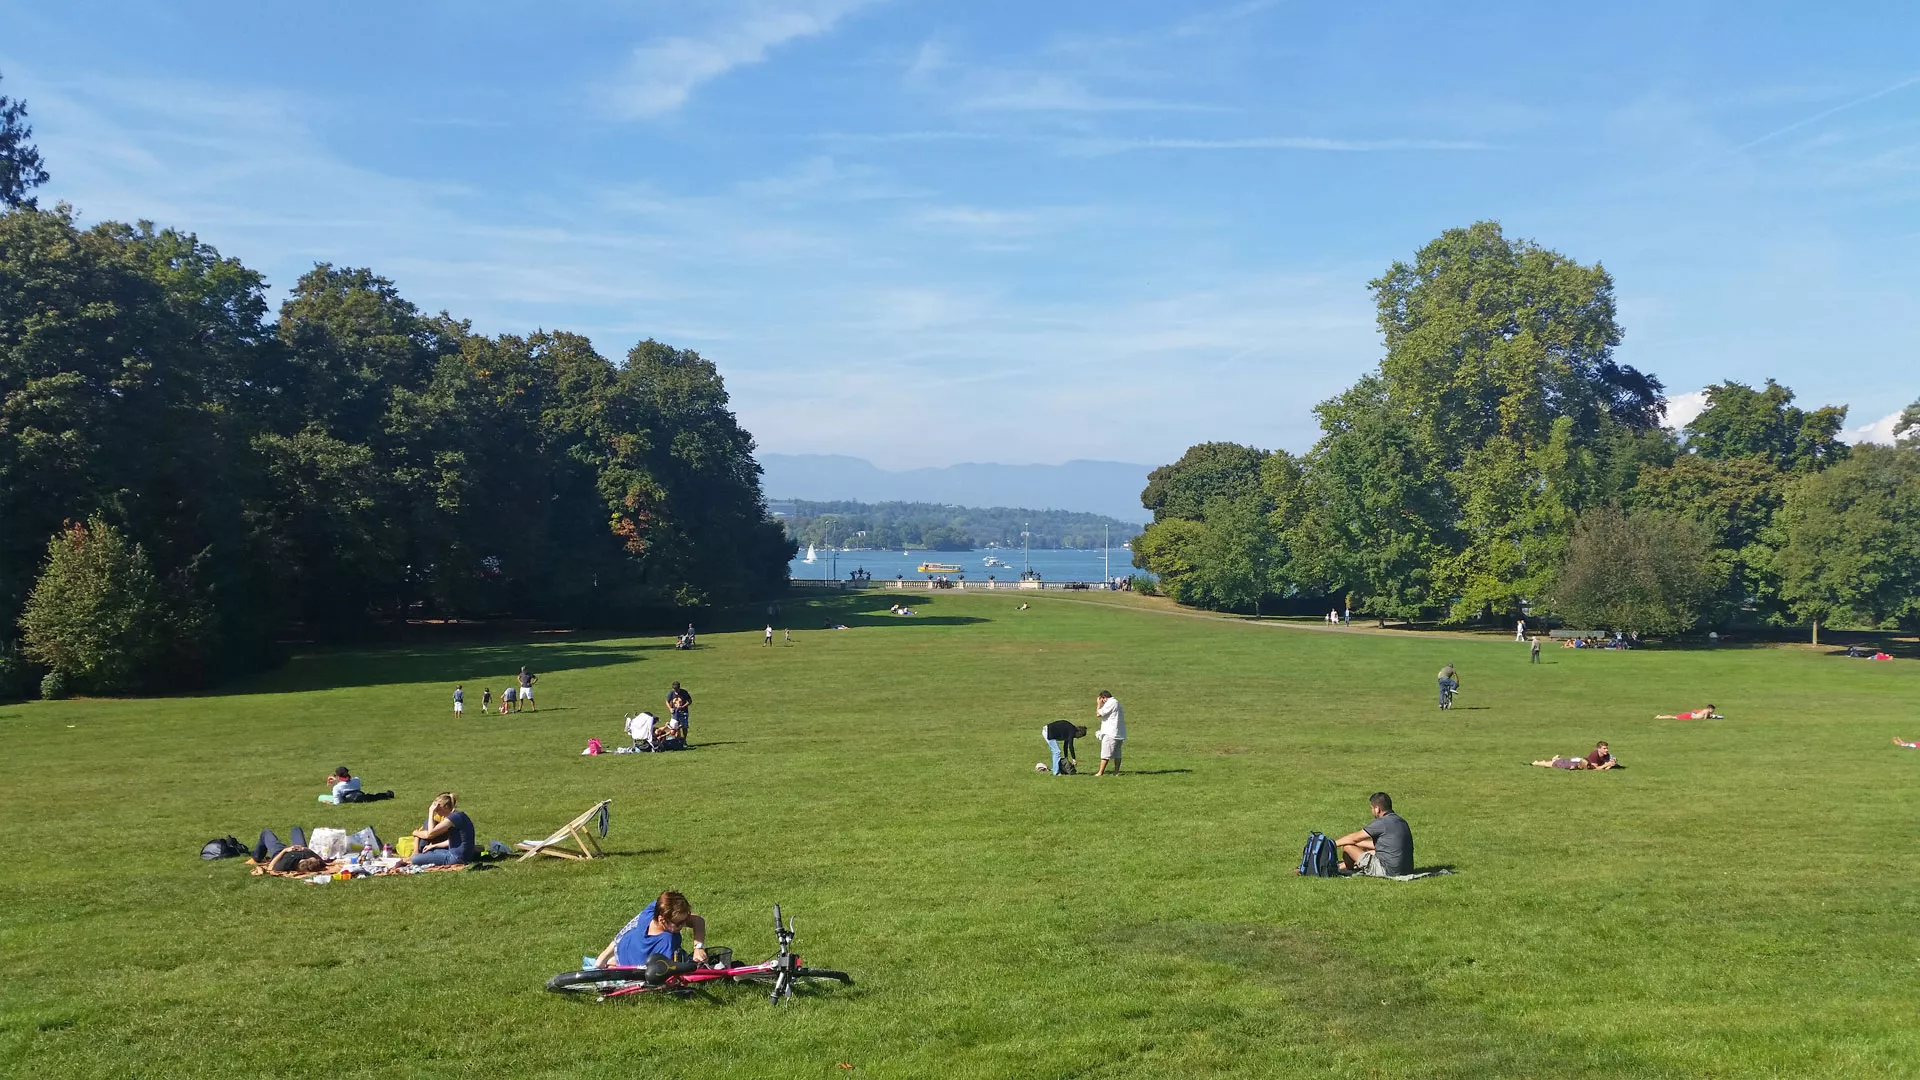 Park O-Vive in Switzerland, Europe | Parks - Rated 3.8